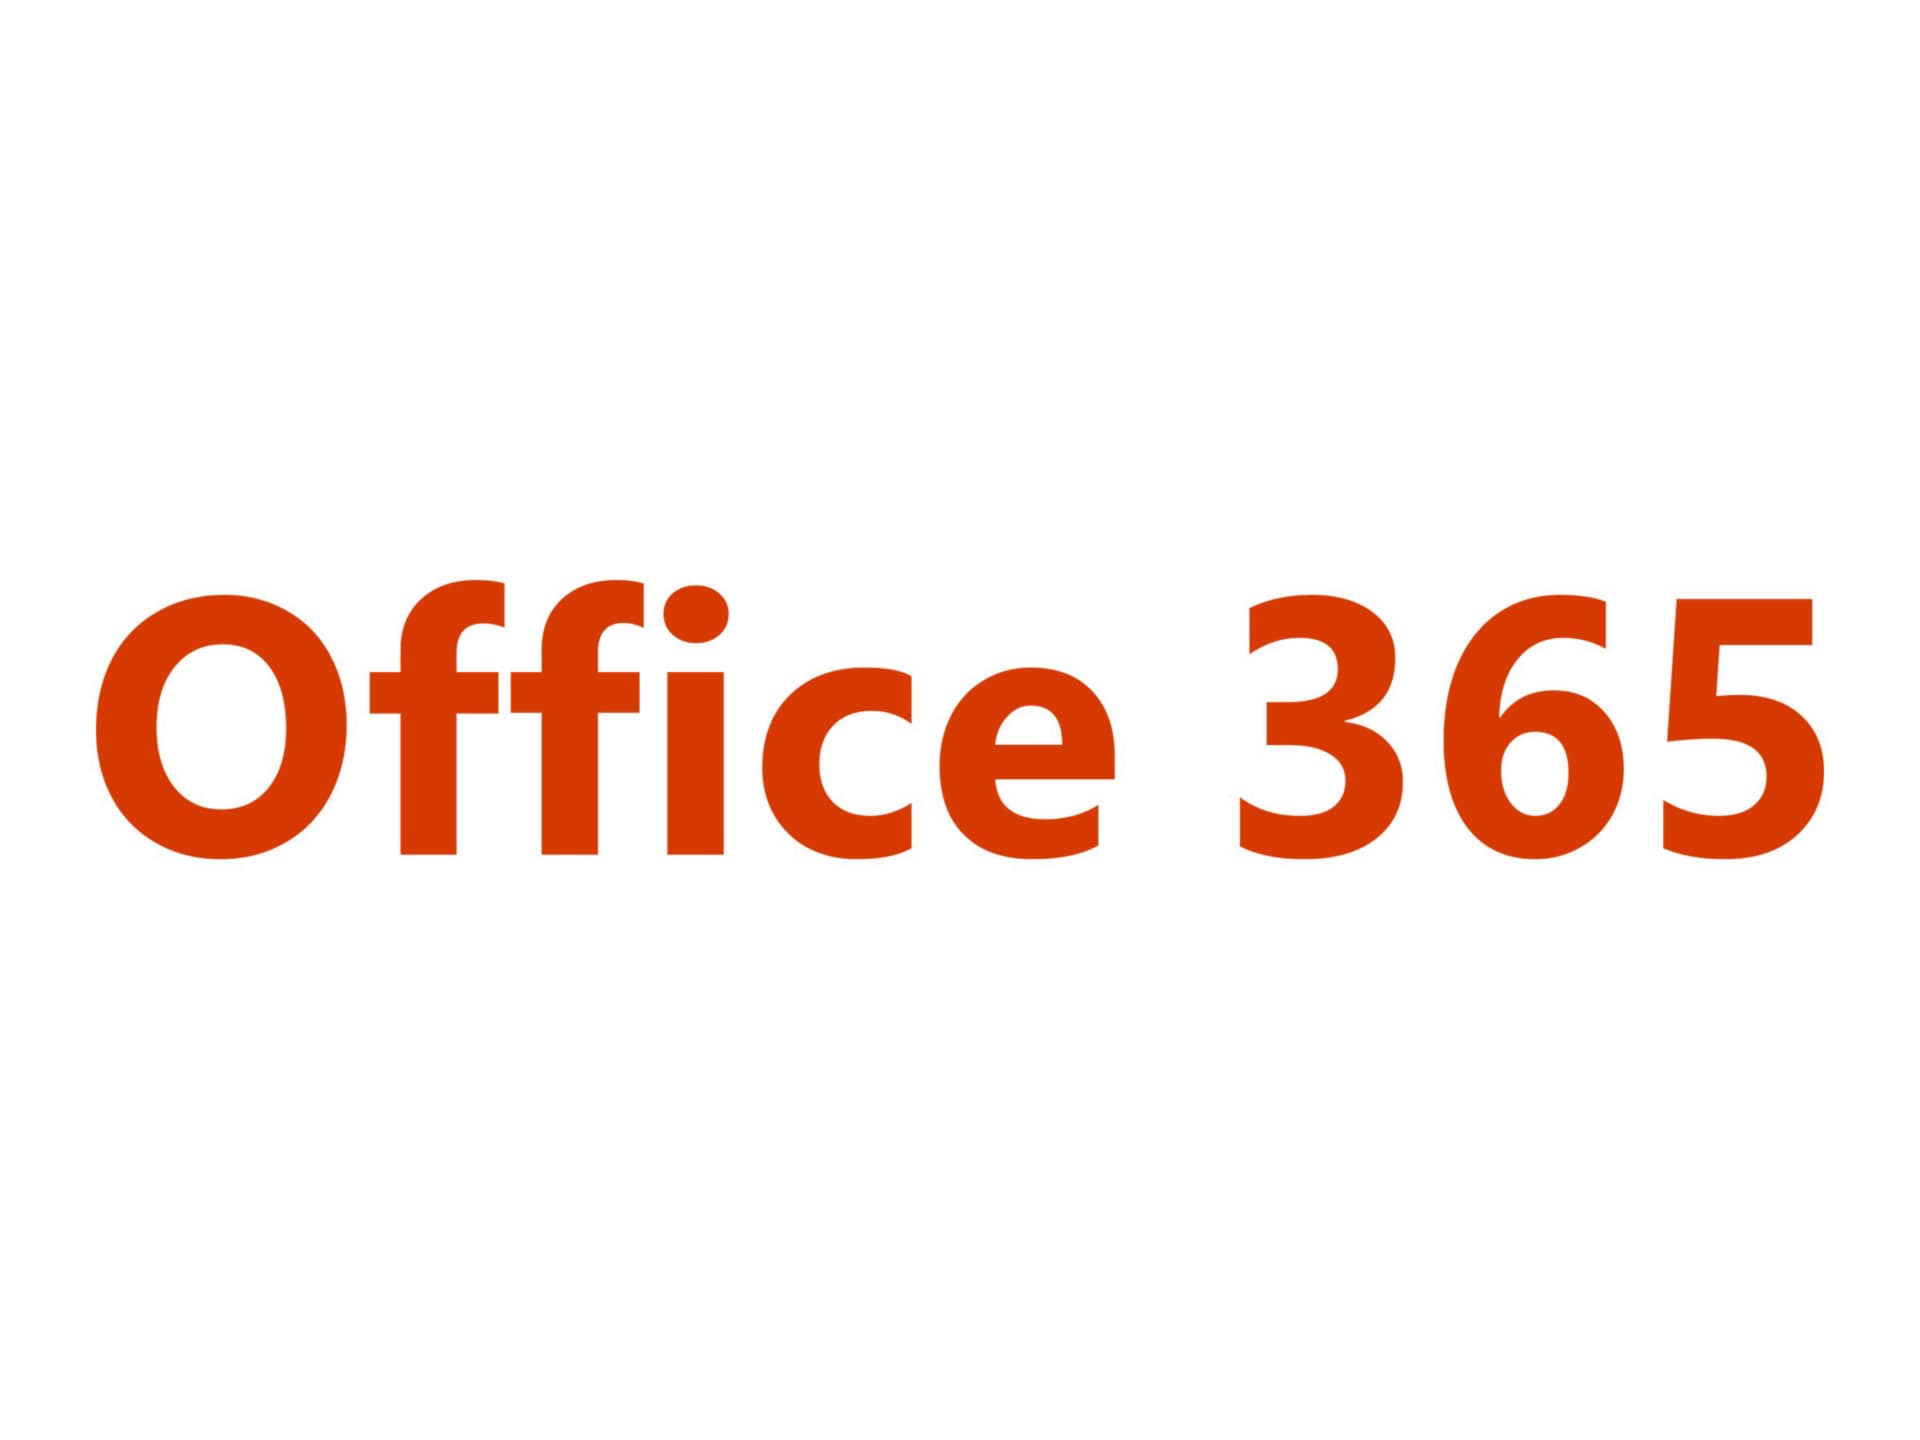 Microsoft Office 365 (Plan A5) - subscription license - 1 user